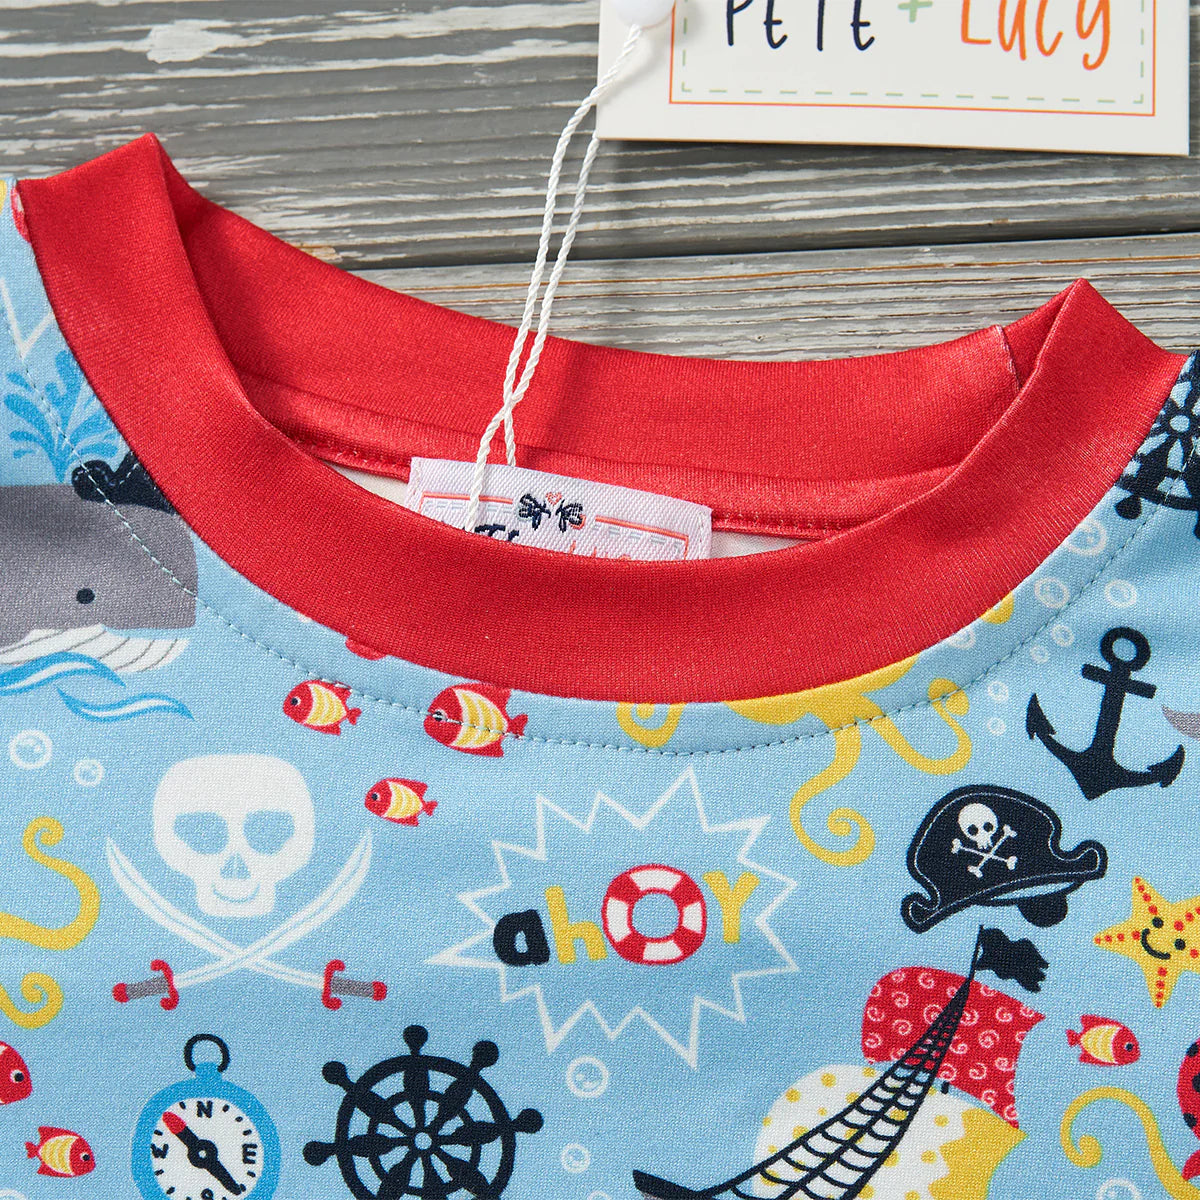 (Preorder) Stormy Seas Romper by Pete + Lucy